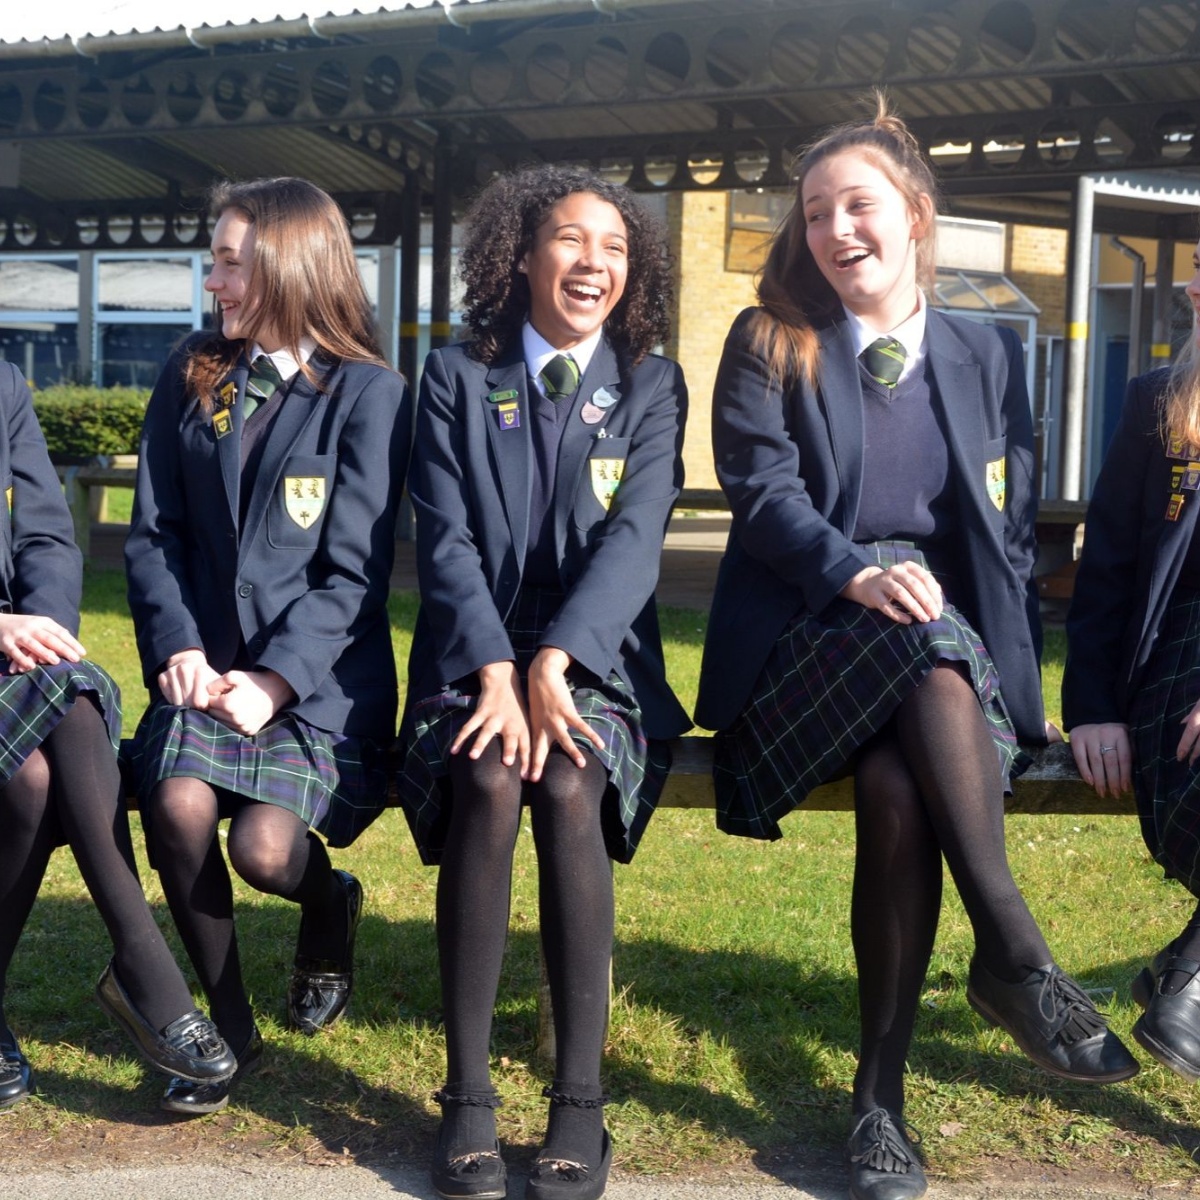 Crookhorn College - Students vote for new skirts - The results: